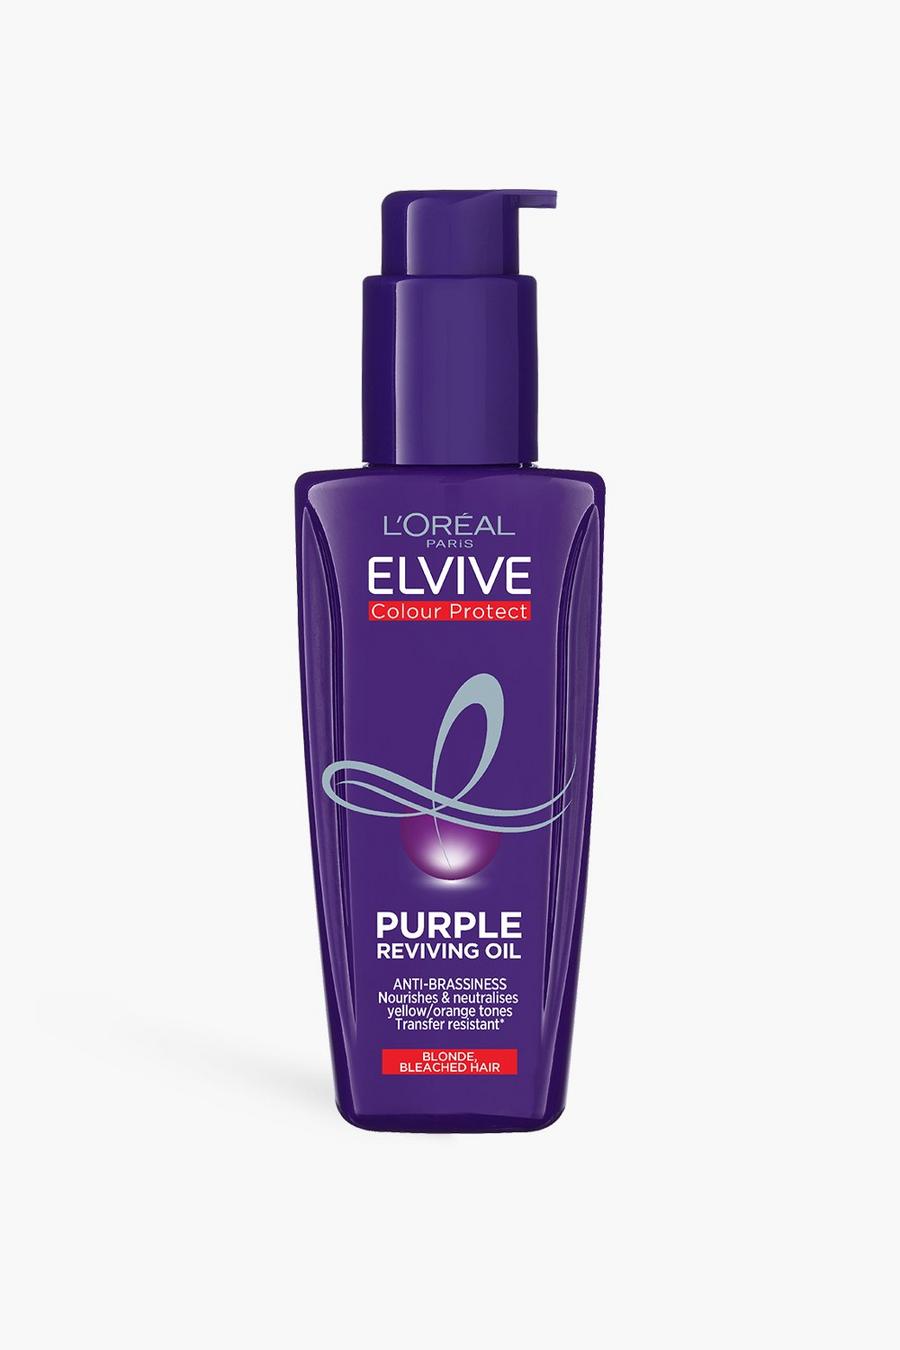 L'Oréal Elvive Colour Protect Purple Anti-Brassiness Hair Oil for Highlighted Brunette 100ml image number 1